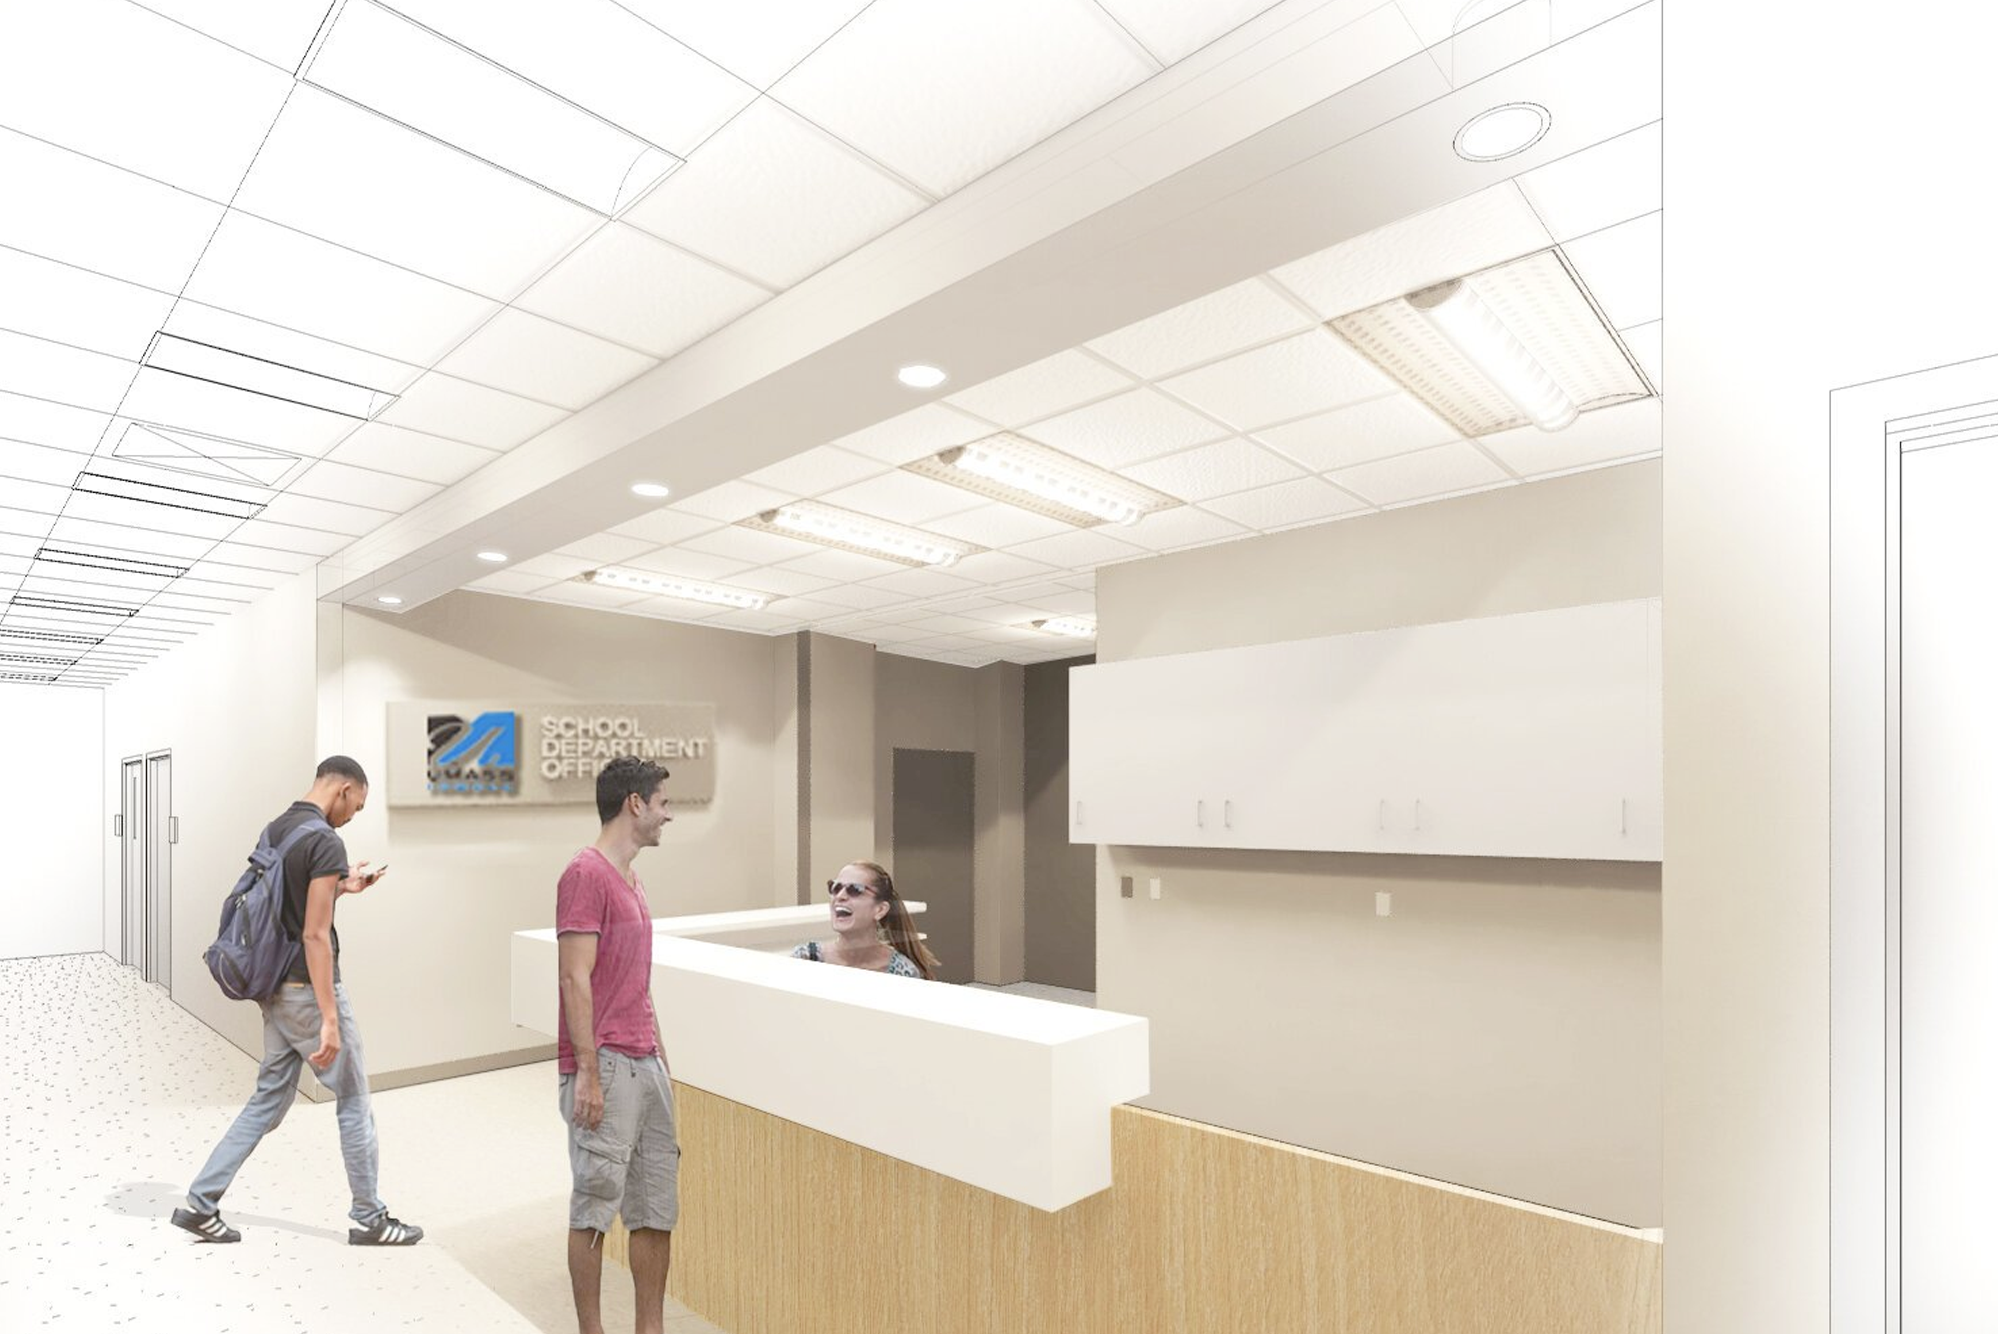 Interior, Rendering of UMass Lowell's South Campus offices, reception area with people occupying the space